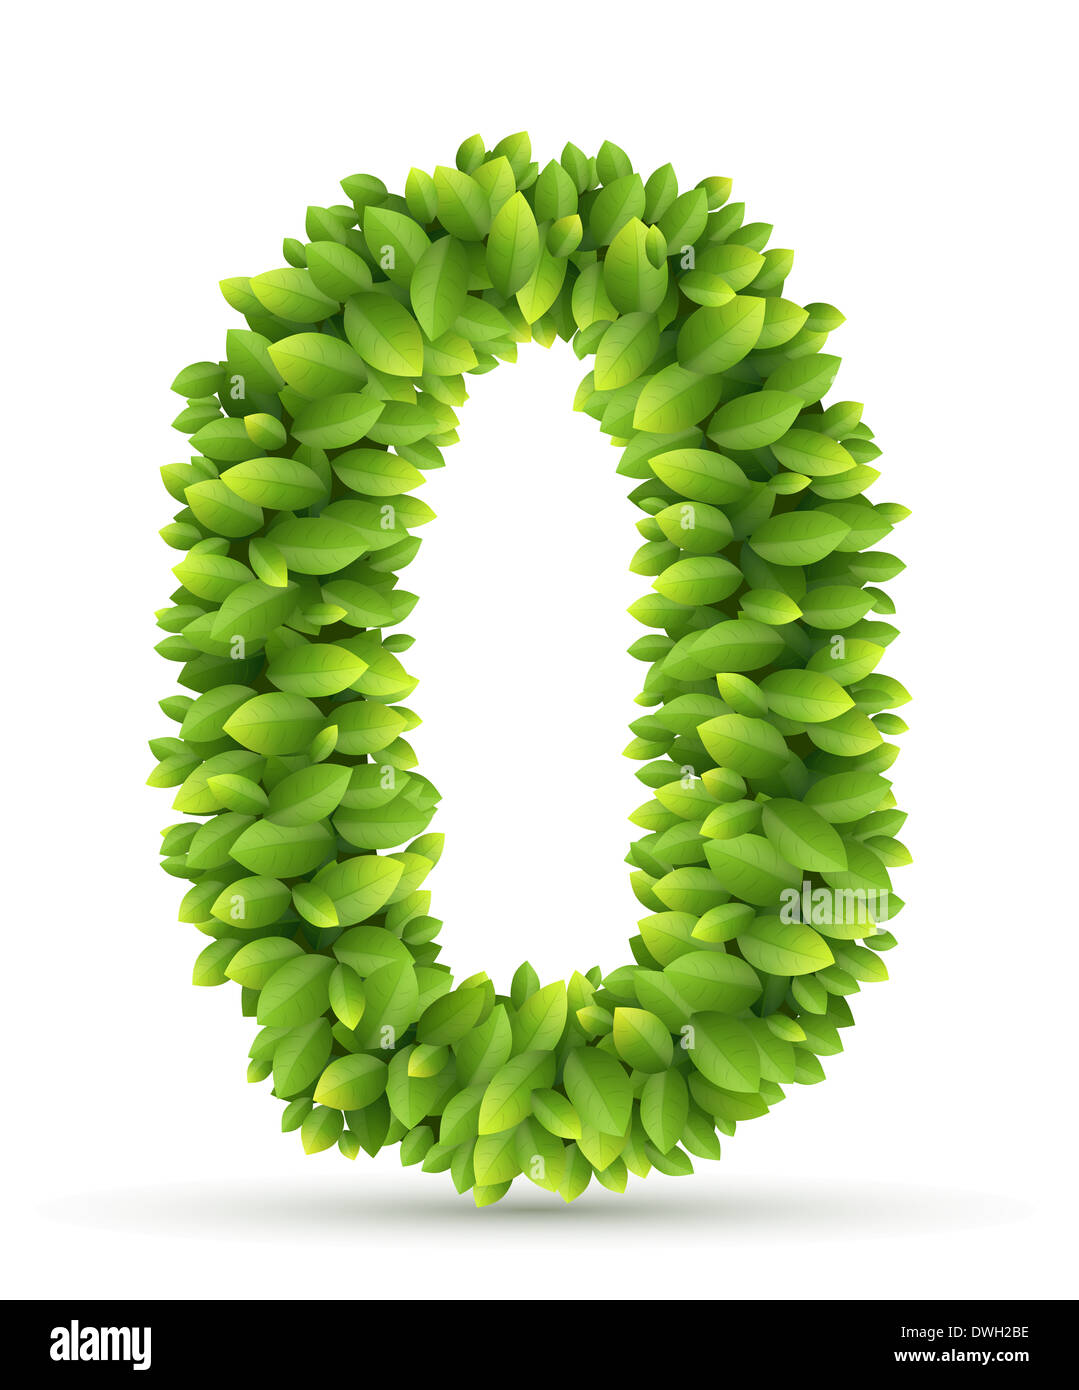 Number, vector alphabet of green leaves Stock Photo